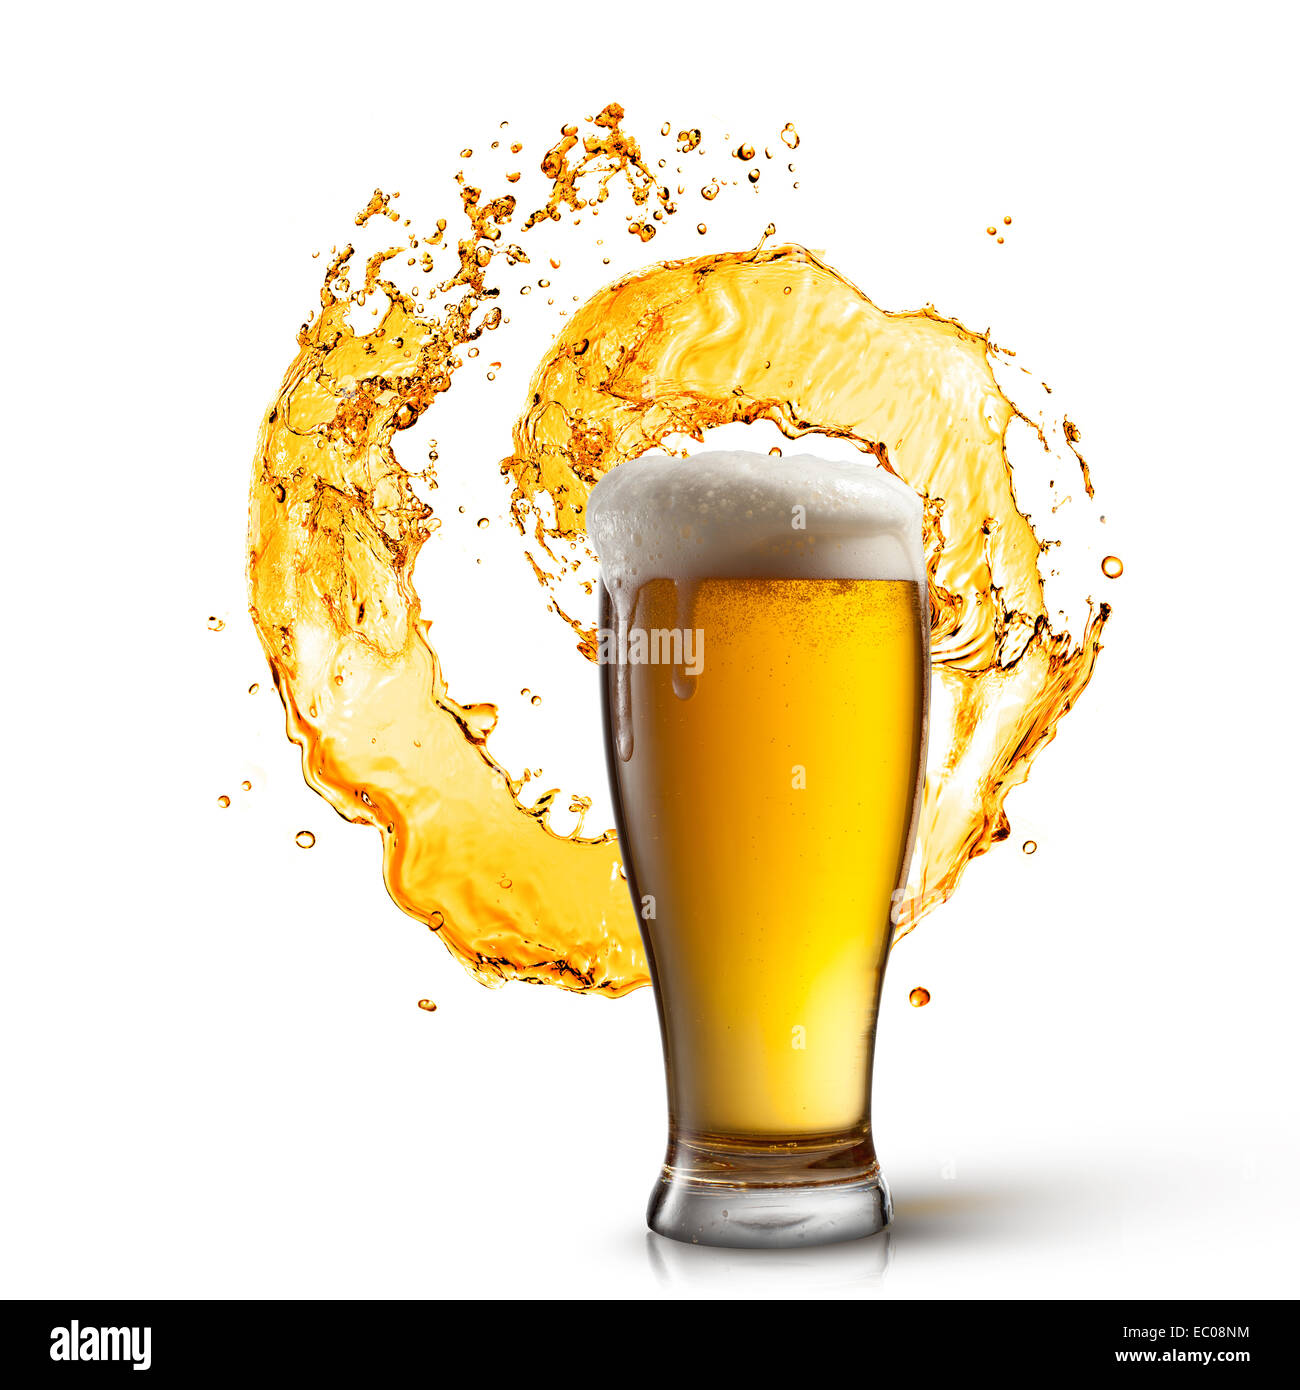 https://c8.alamy.com/comp/EC08NM/beer-in-glass-with-splash-isolated-on-white-background-EC08NM.jpg